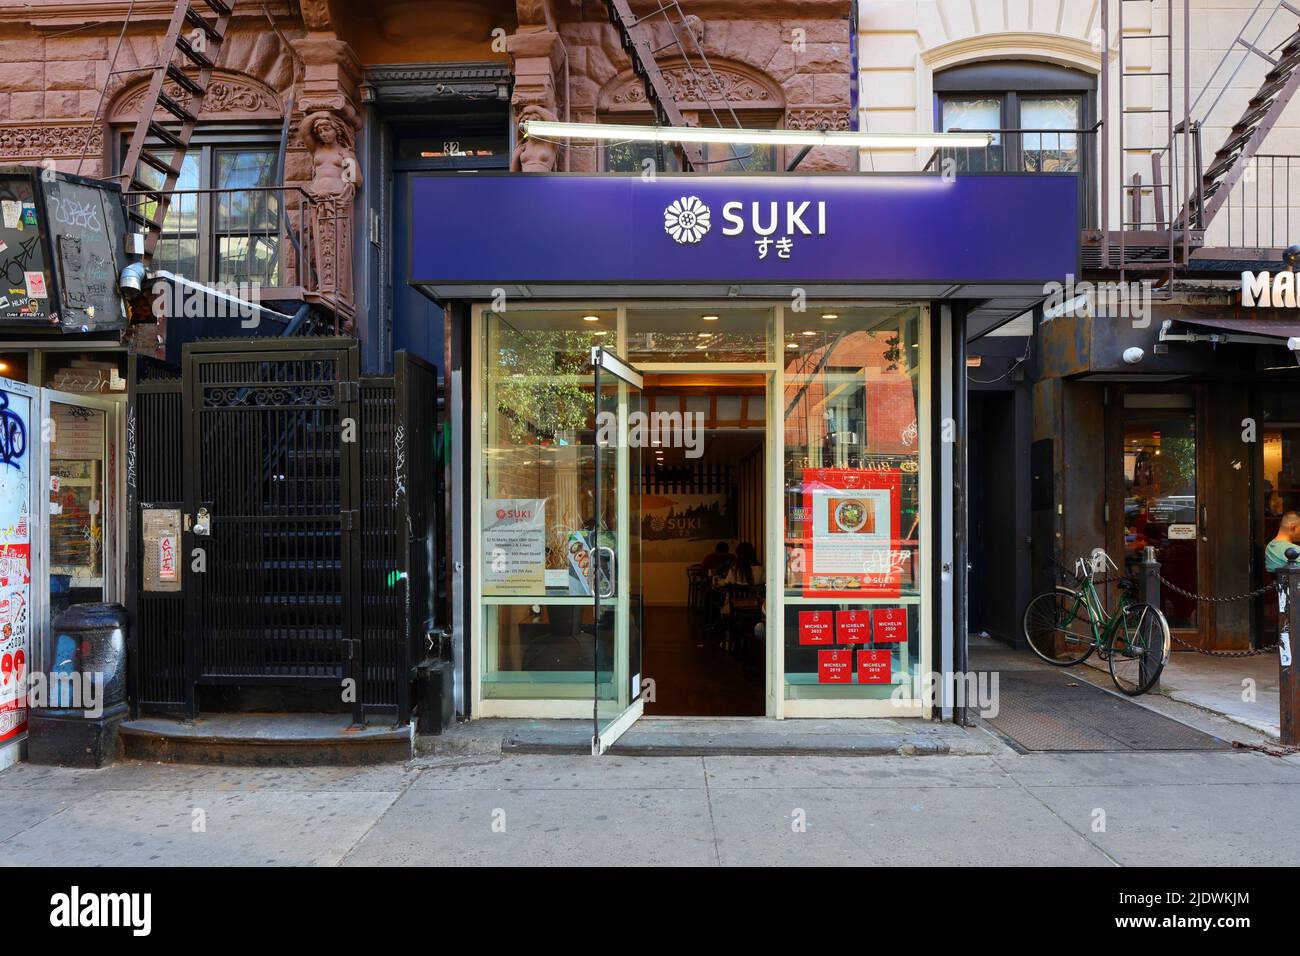 [historical storefront] Suki すき, 32 St Marks Pl, New York, NYC photo of a Japanese curry restaurant in Manhattan's "Little Tokyo" East Village. Stock Photo